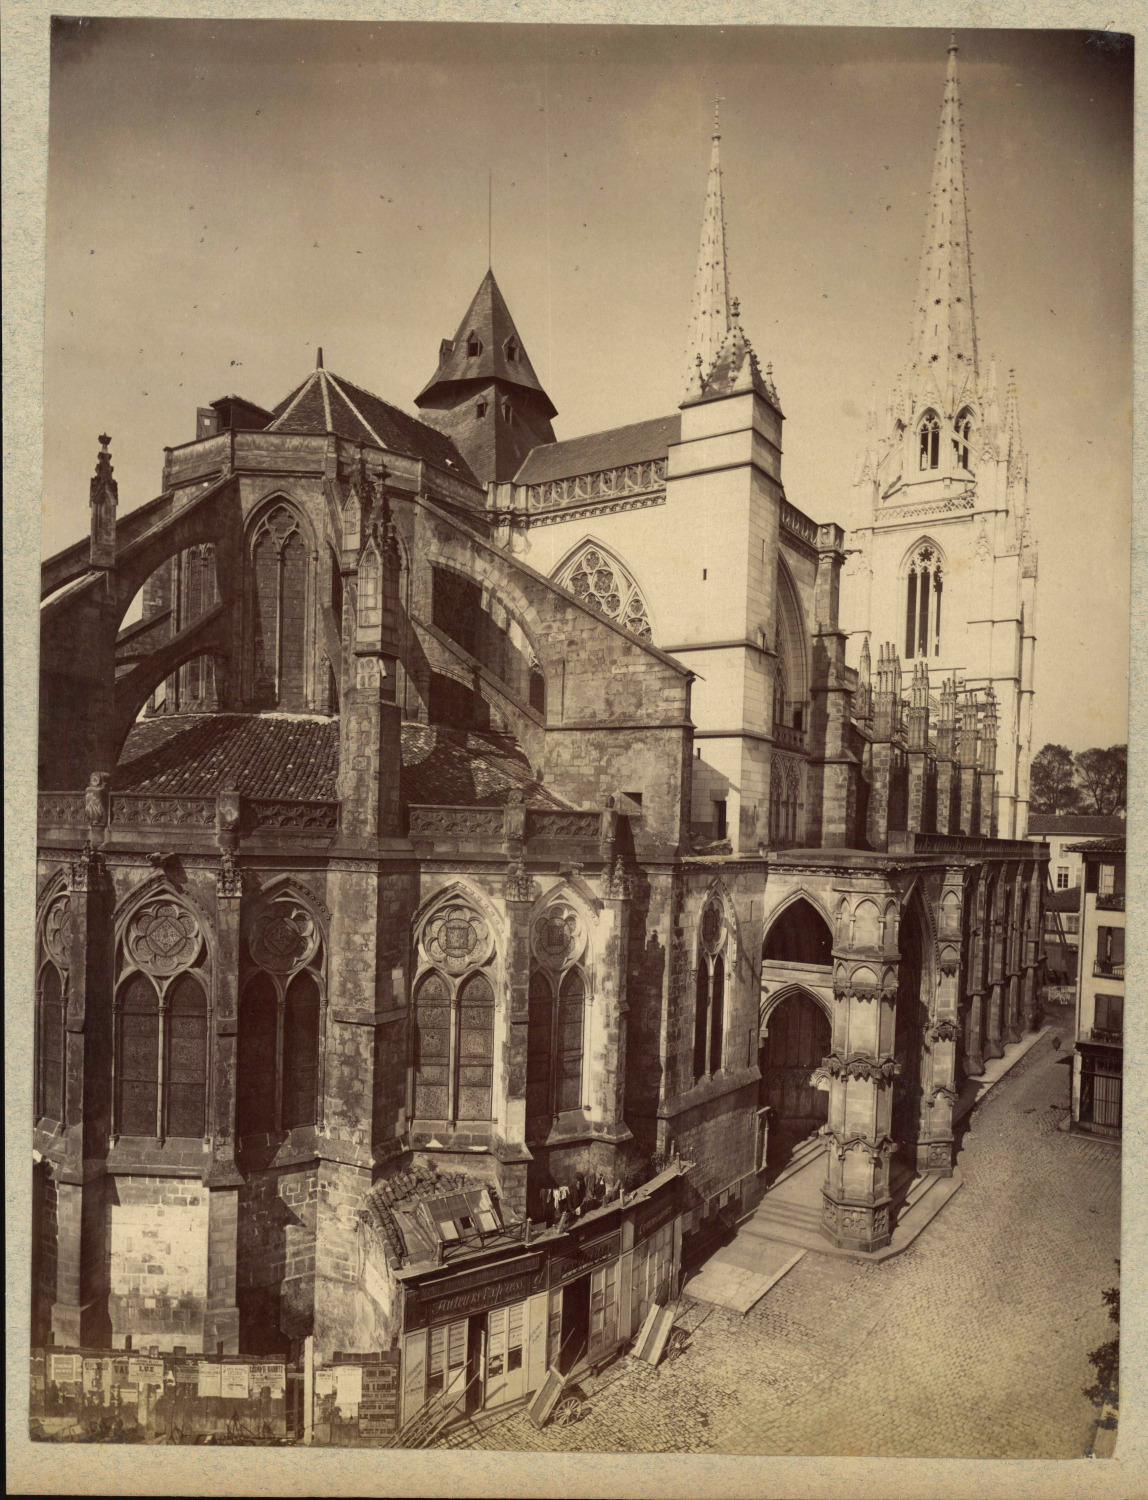 France, Bayonne, Cathedral of Sainte-Marie Vintage print print print print print print, album print